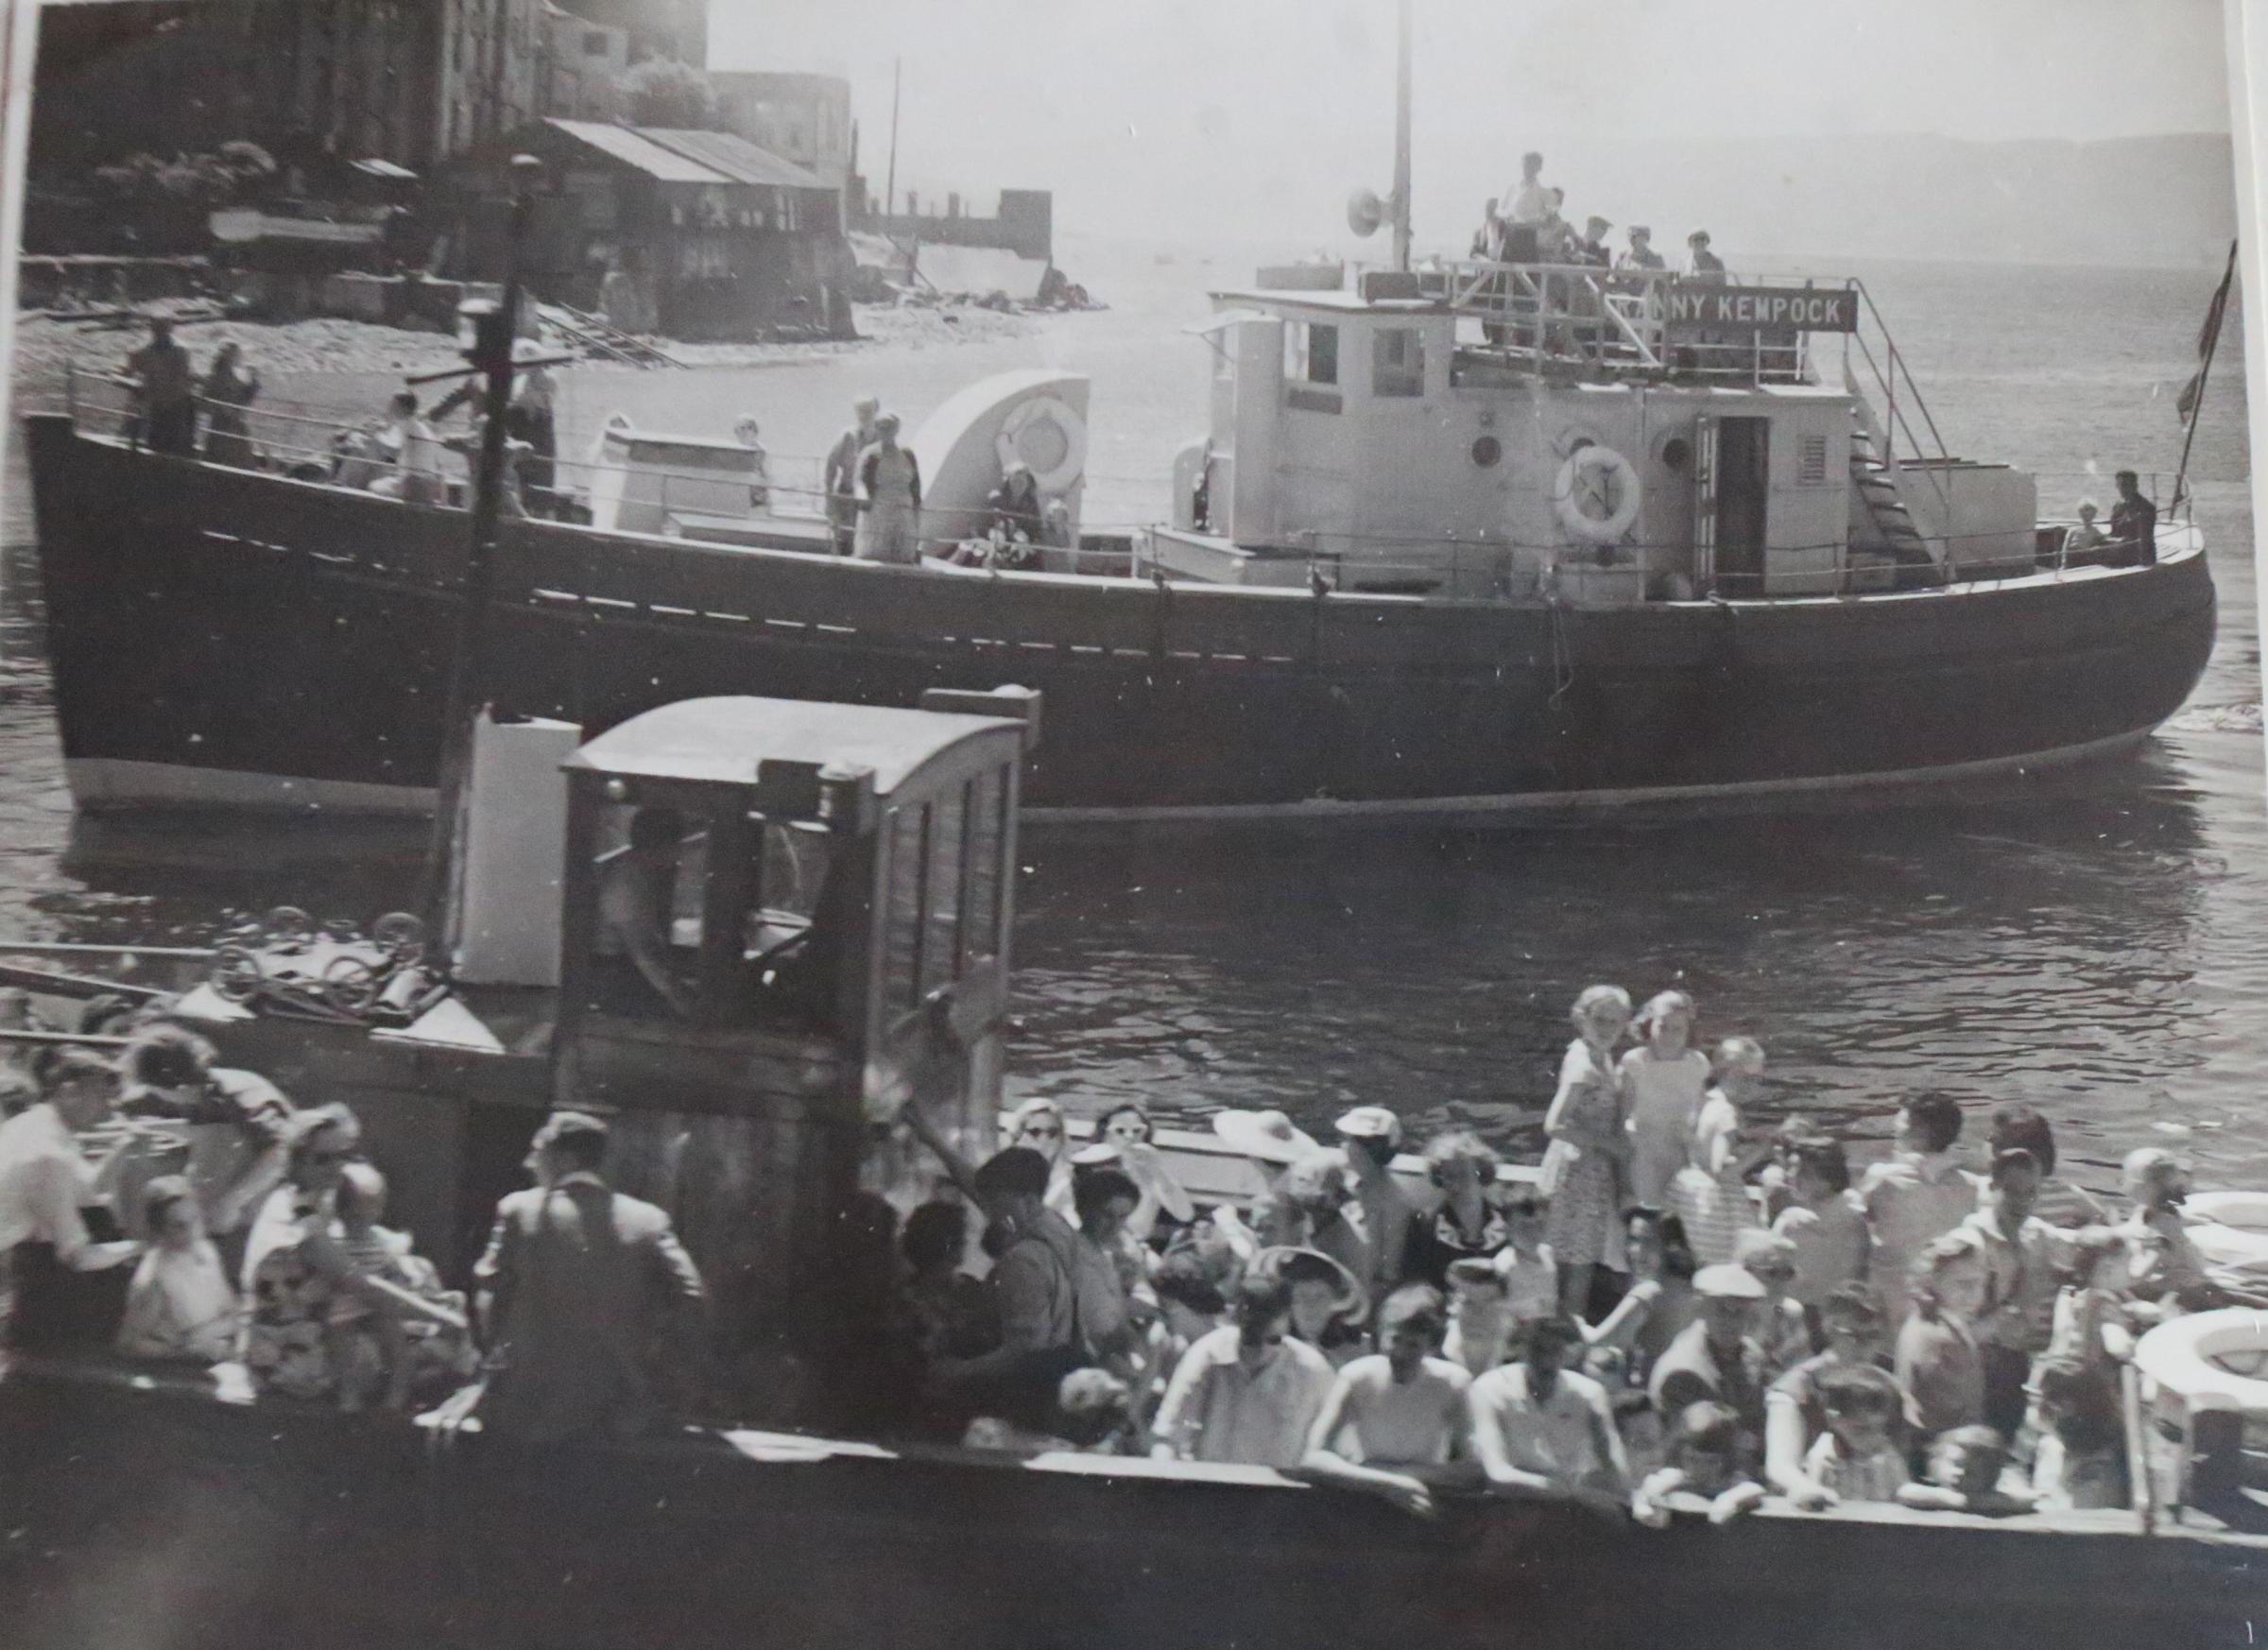 Ritchie Bros Ferries, Gourock. Lady Jane, front with Granny Kempock ferry